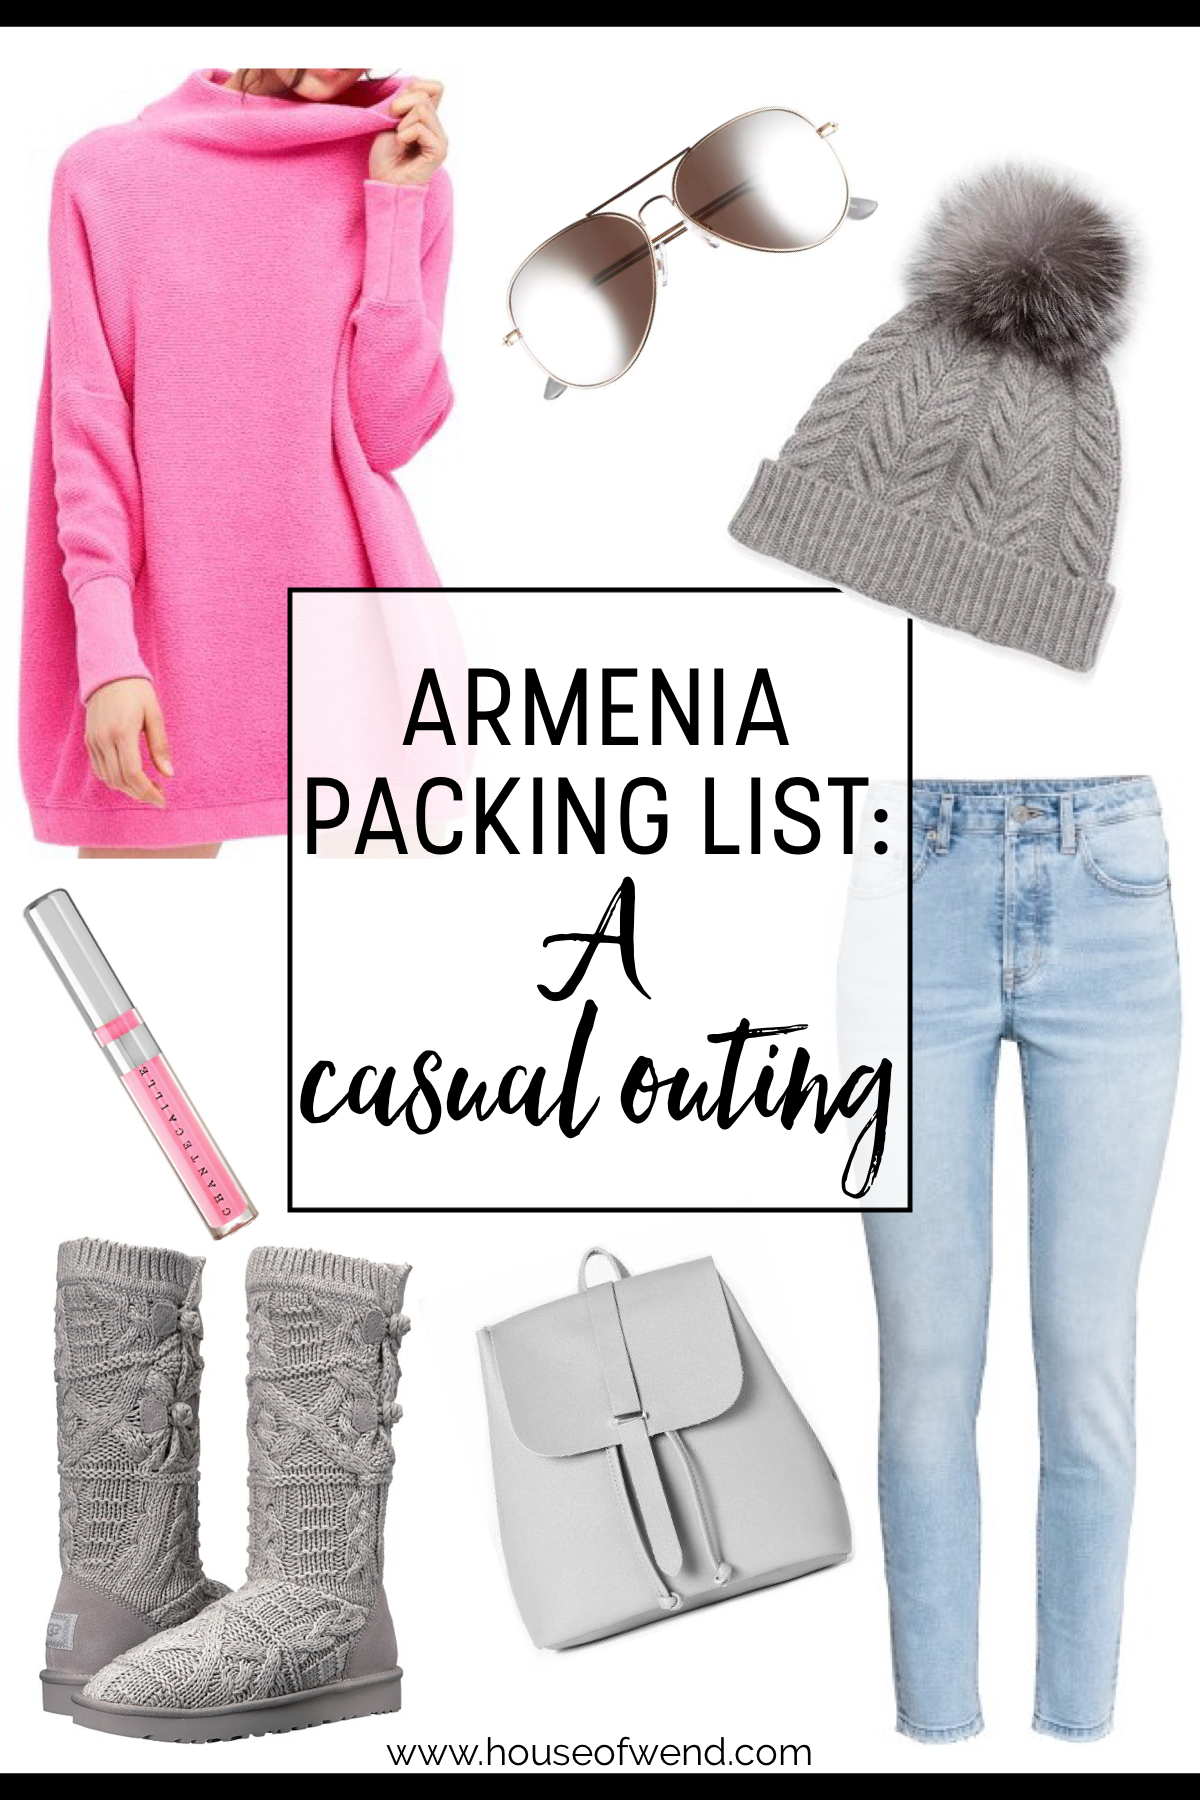 Armenia packing list for a casual outing